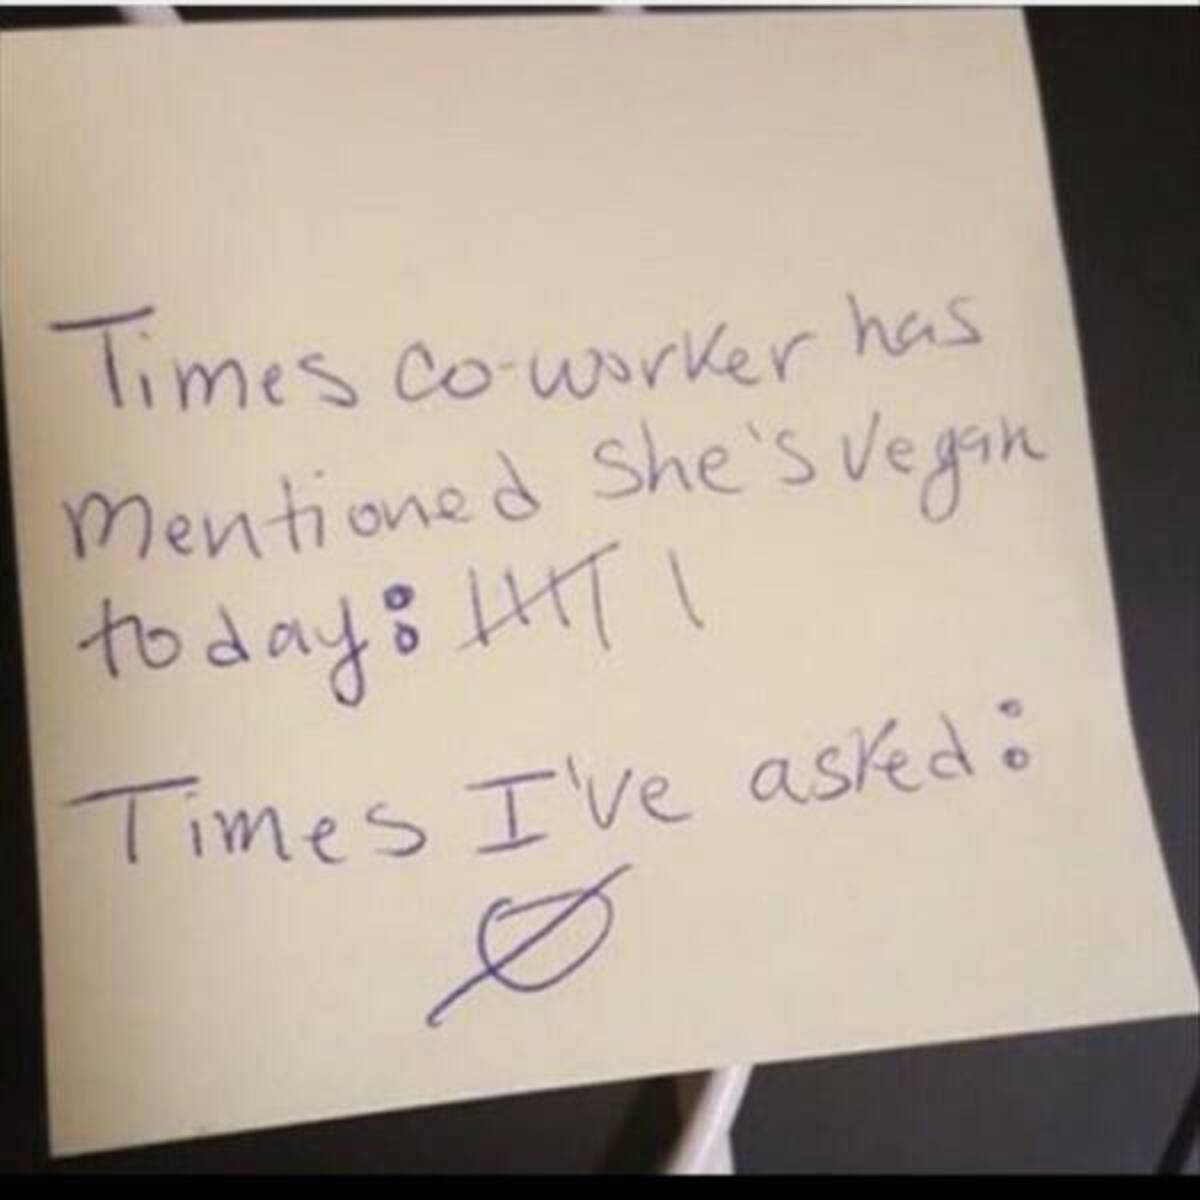 handwriting - Times coworker has mentioned She's vegan I today Ht| Times I've asked